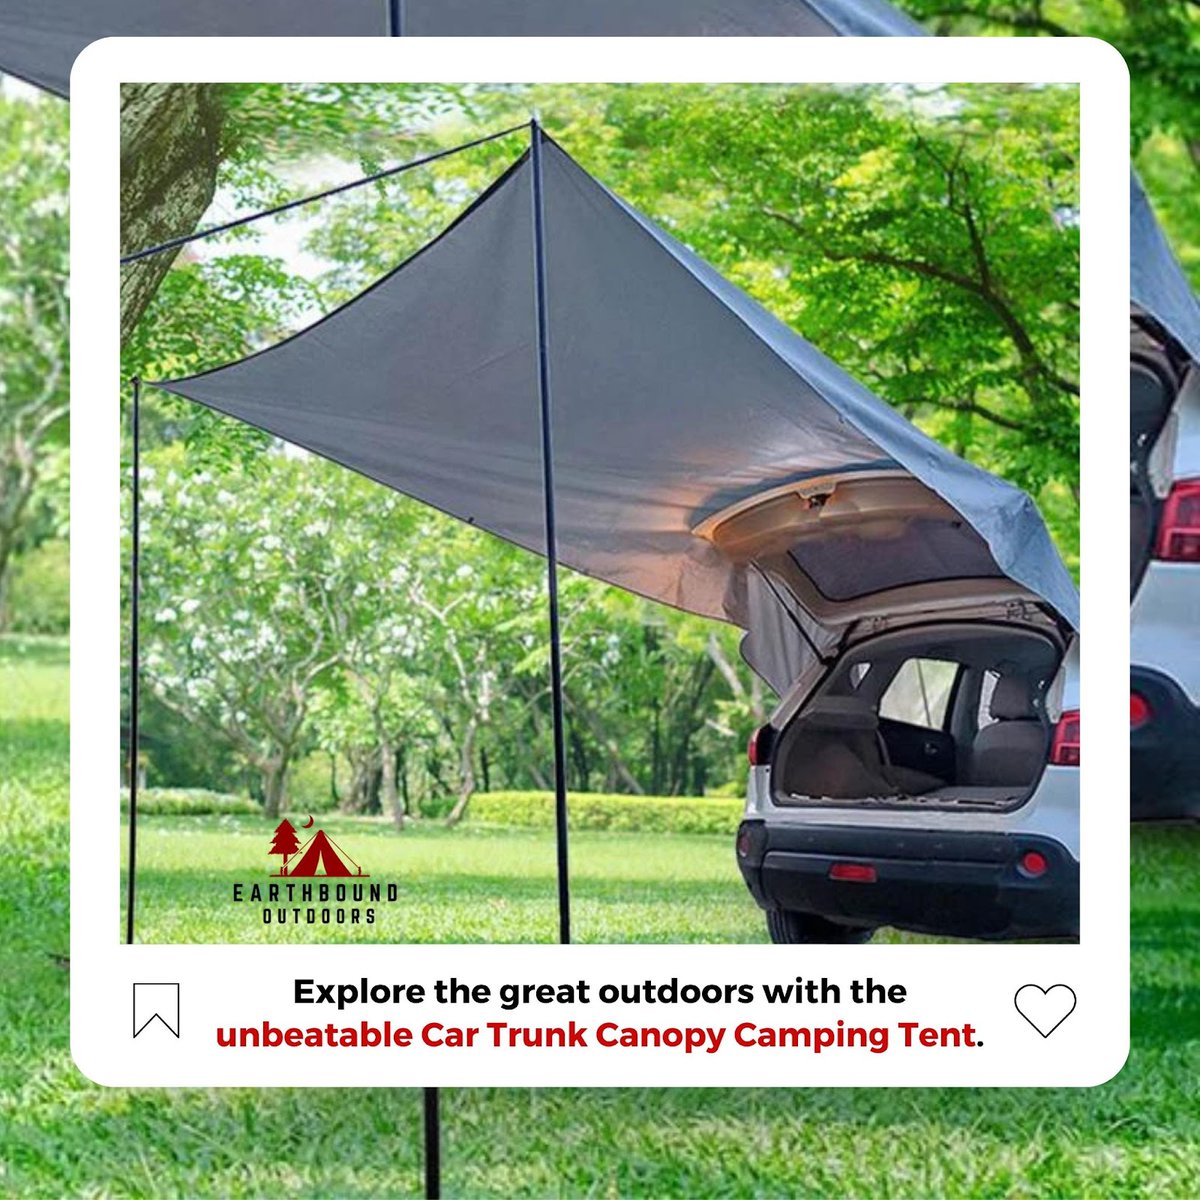 Are you ready to elevate your outdoor adventures to a whole new level of convenience and versatility? Look no further than our Car Trunk Canopy Camping Tent.
.
🌐 earthboundoutdoors.com
.
#earthboundoutdoors #campingtent